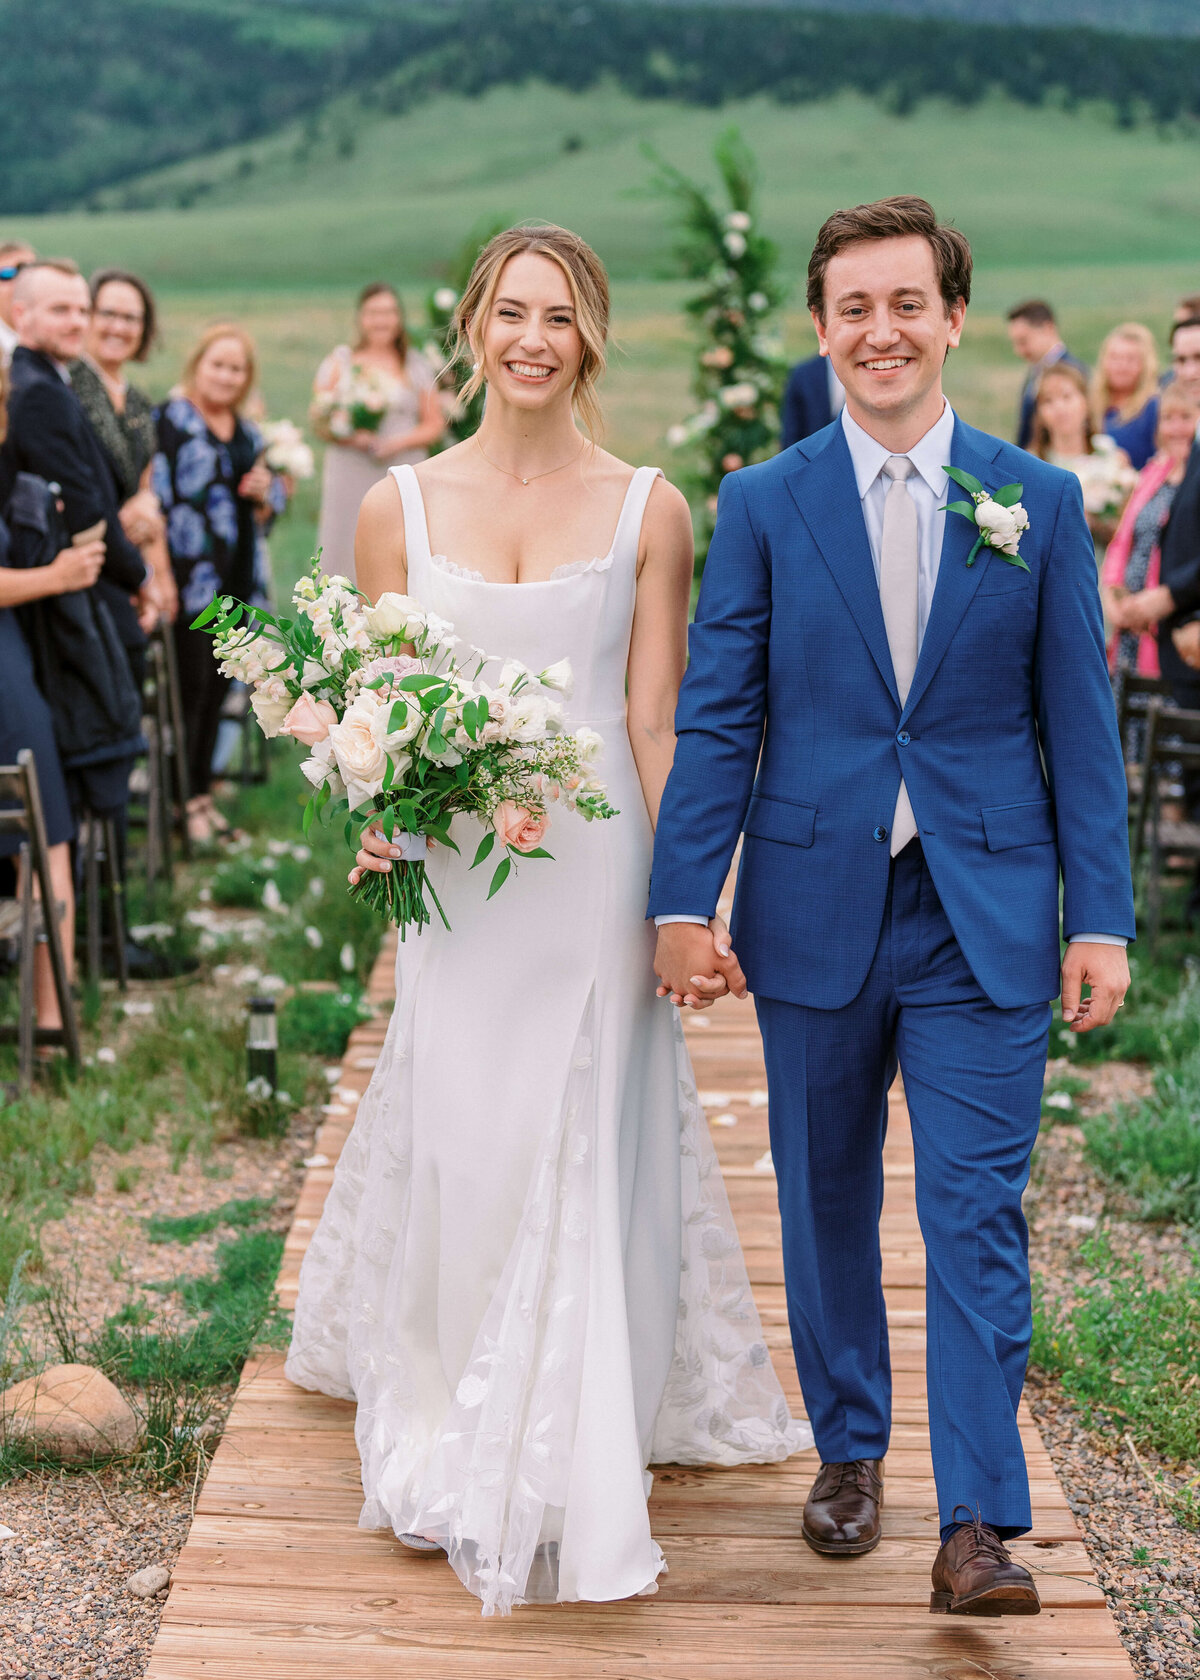 Handsome groom and beautiful bride are finally married!